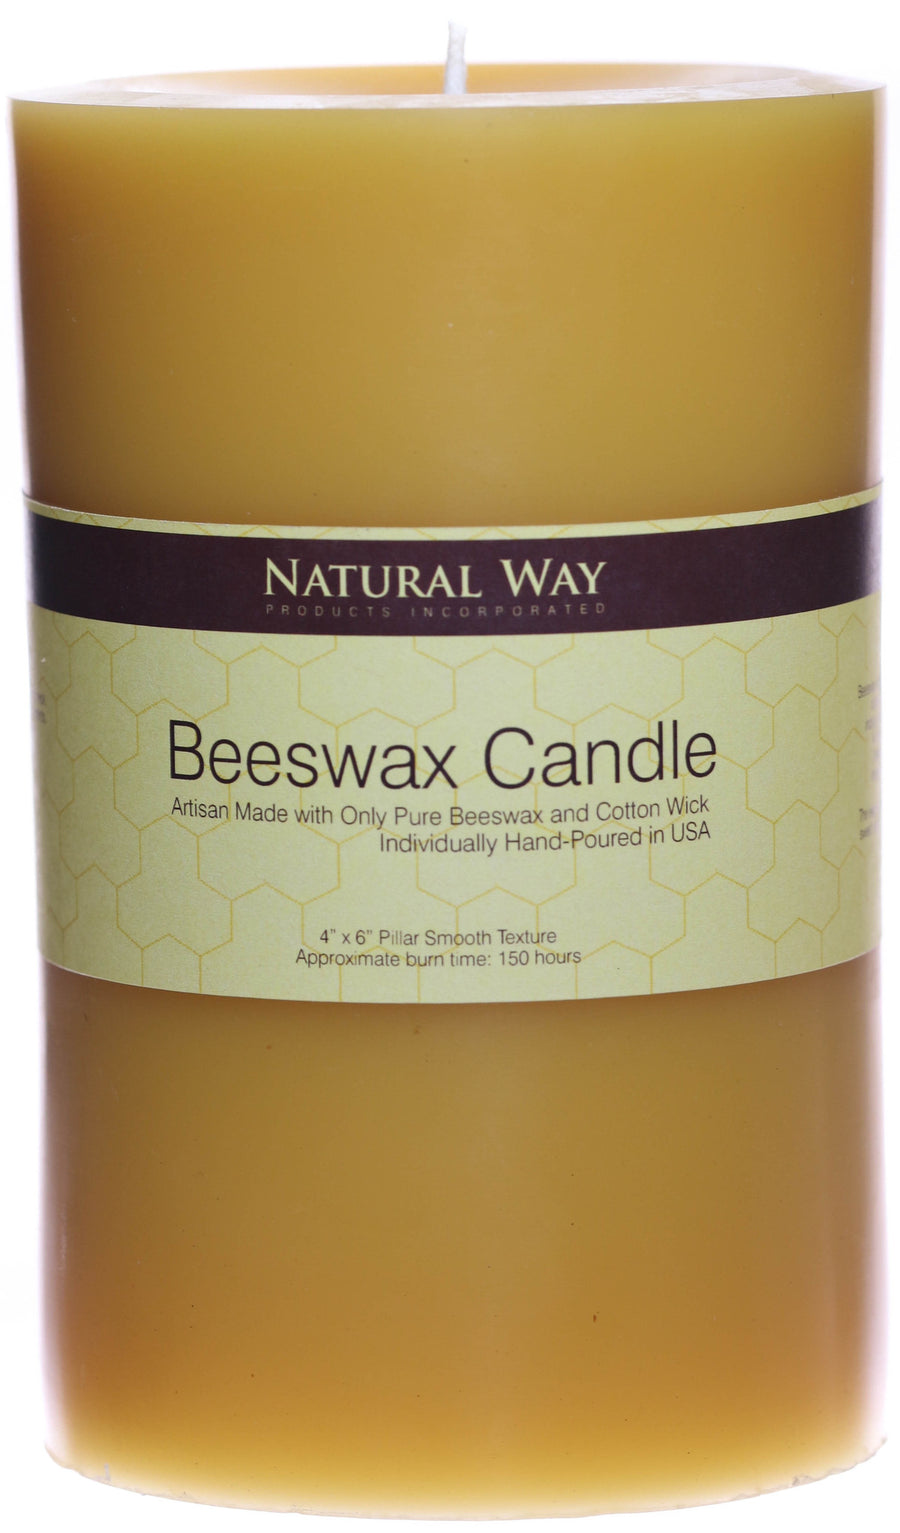 Beeswax Candle 4x6''